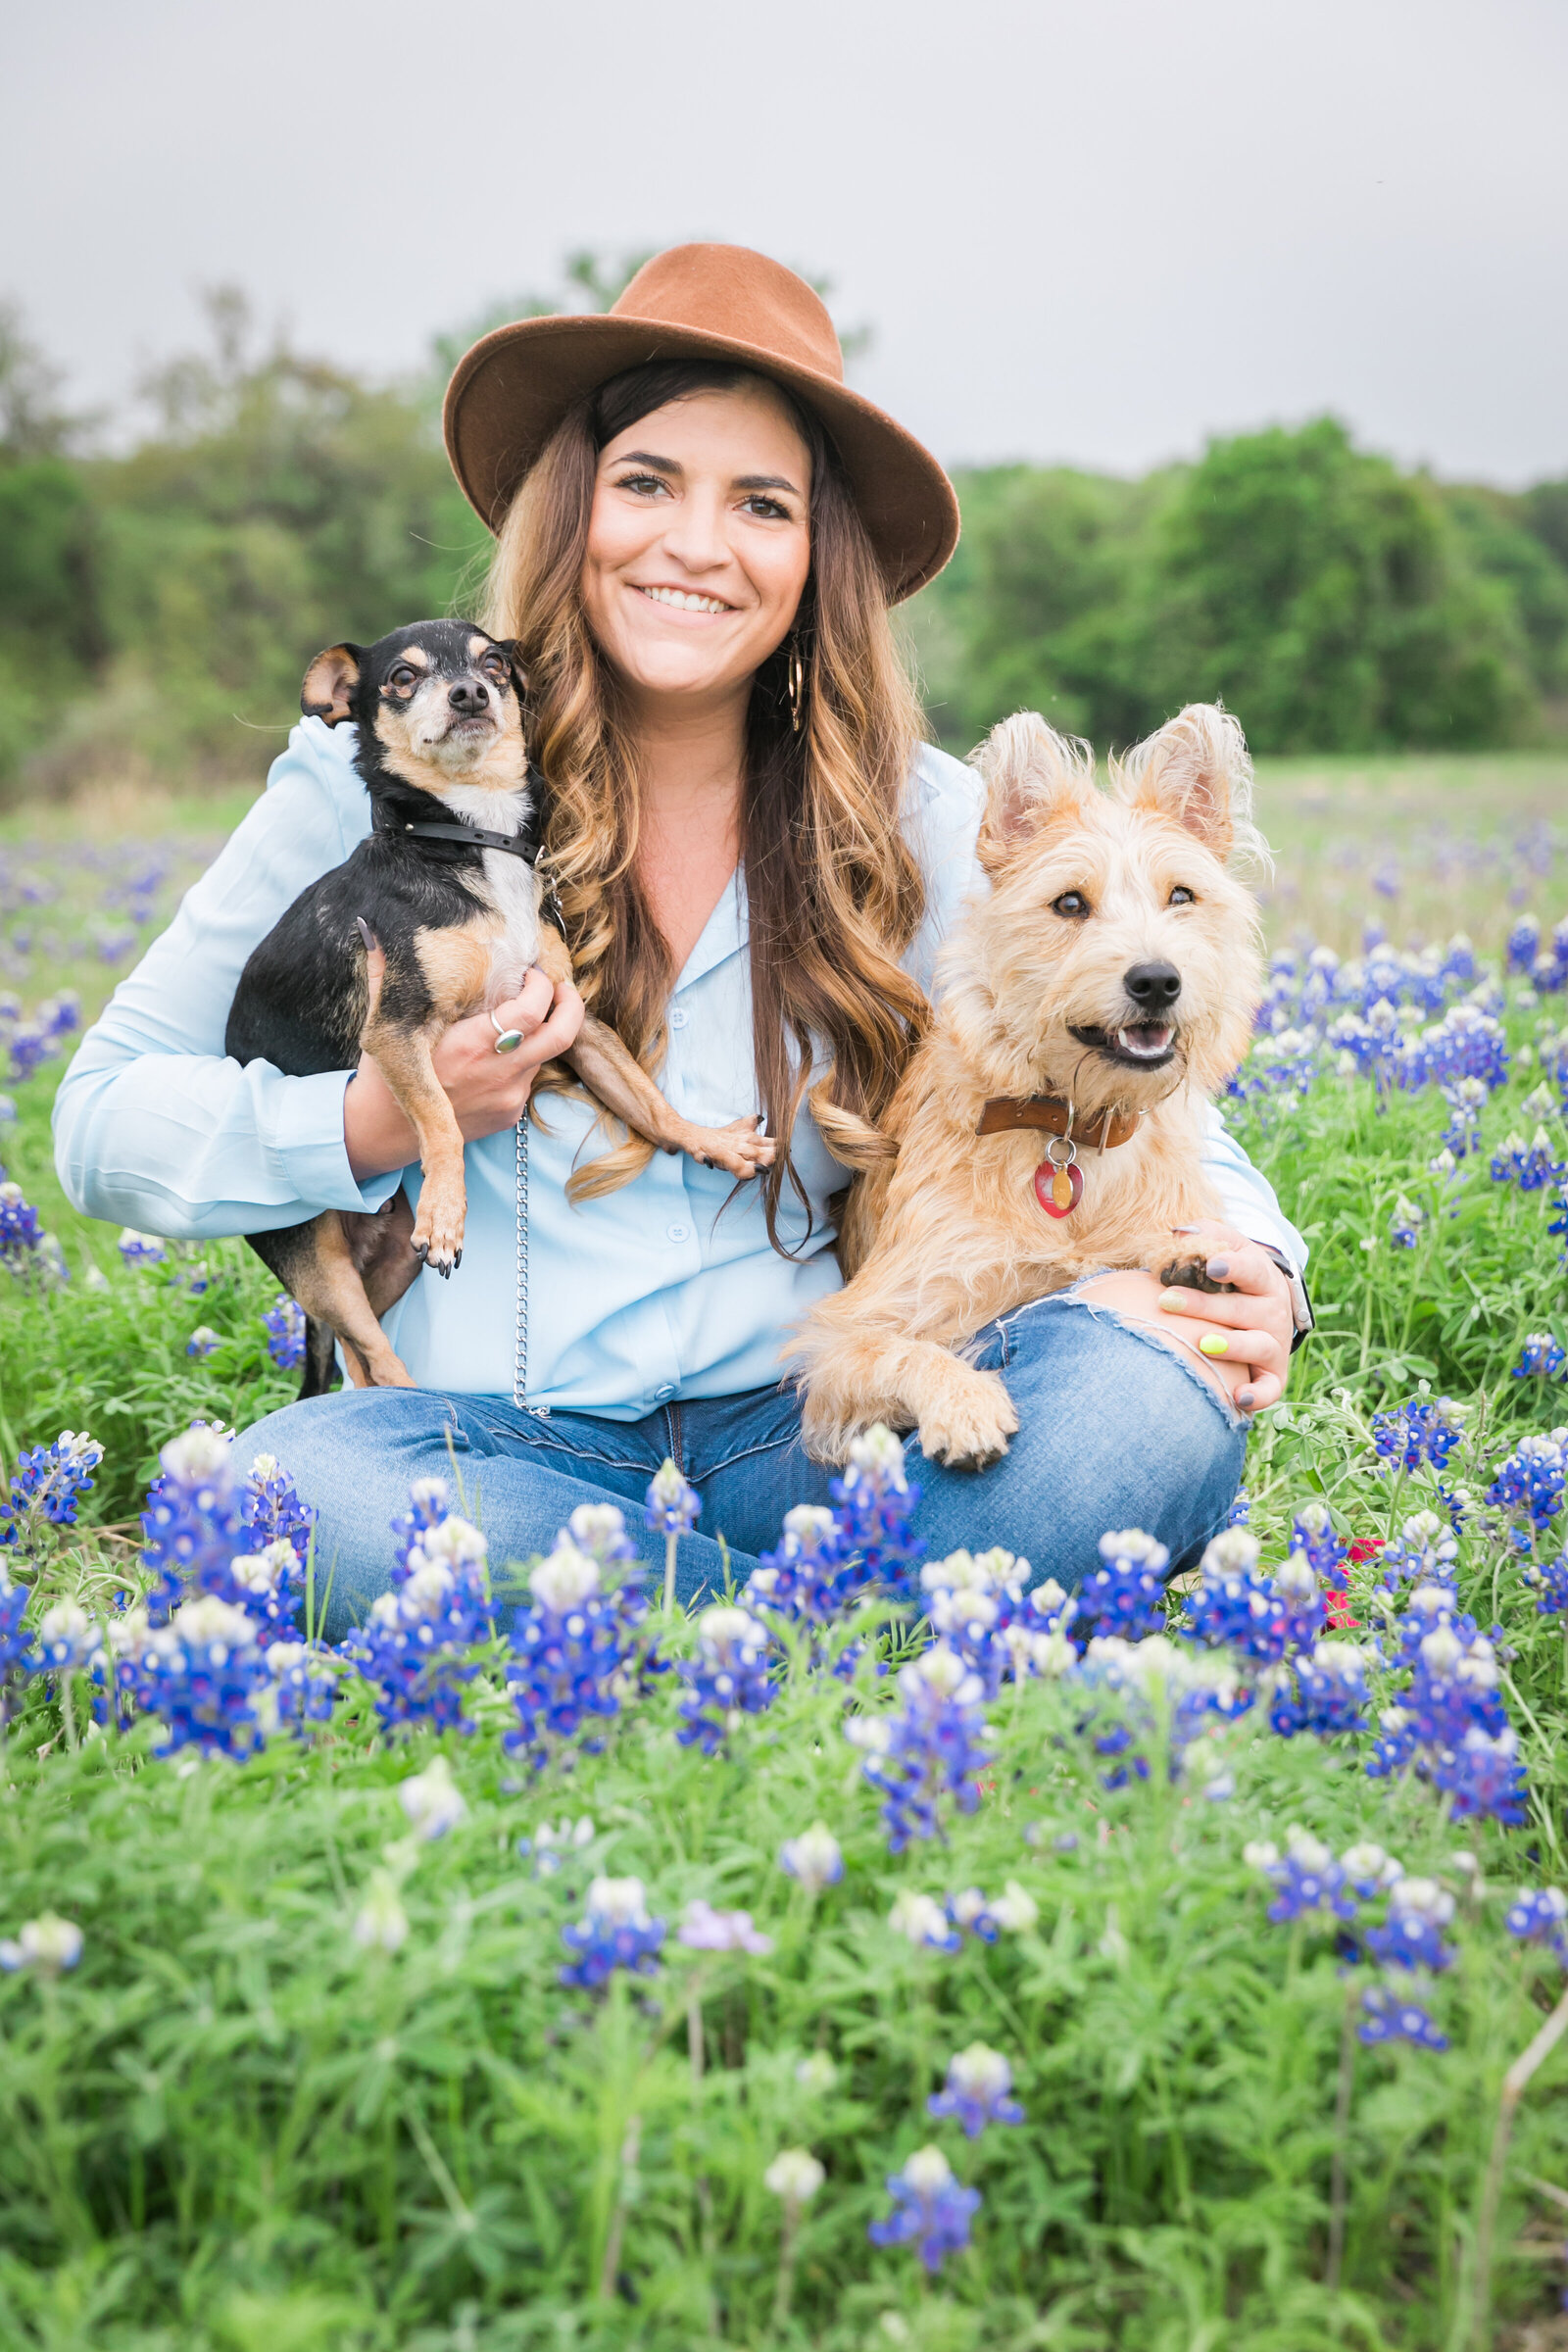 Austin Family Photographer, Tiffany Chapman Photography woman with dogs in bluebonnets photo